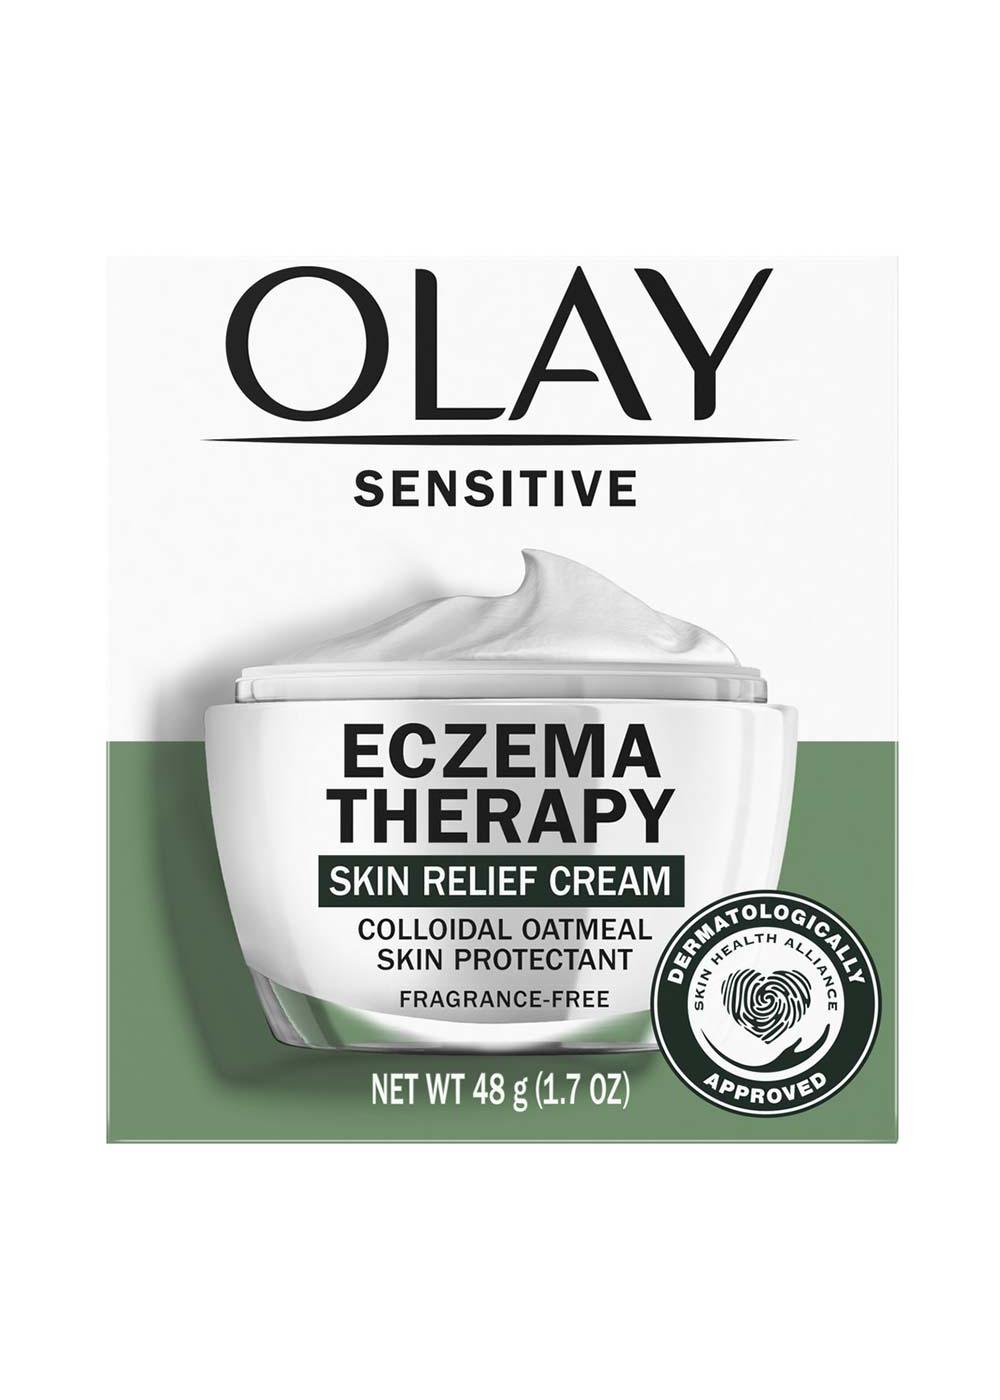 Olay Sensitive Eczema Therapy Skin Relief Cream; image 1 of 3